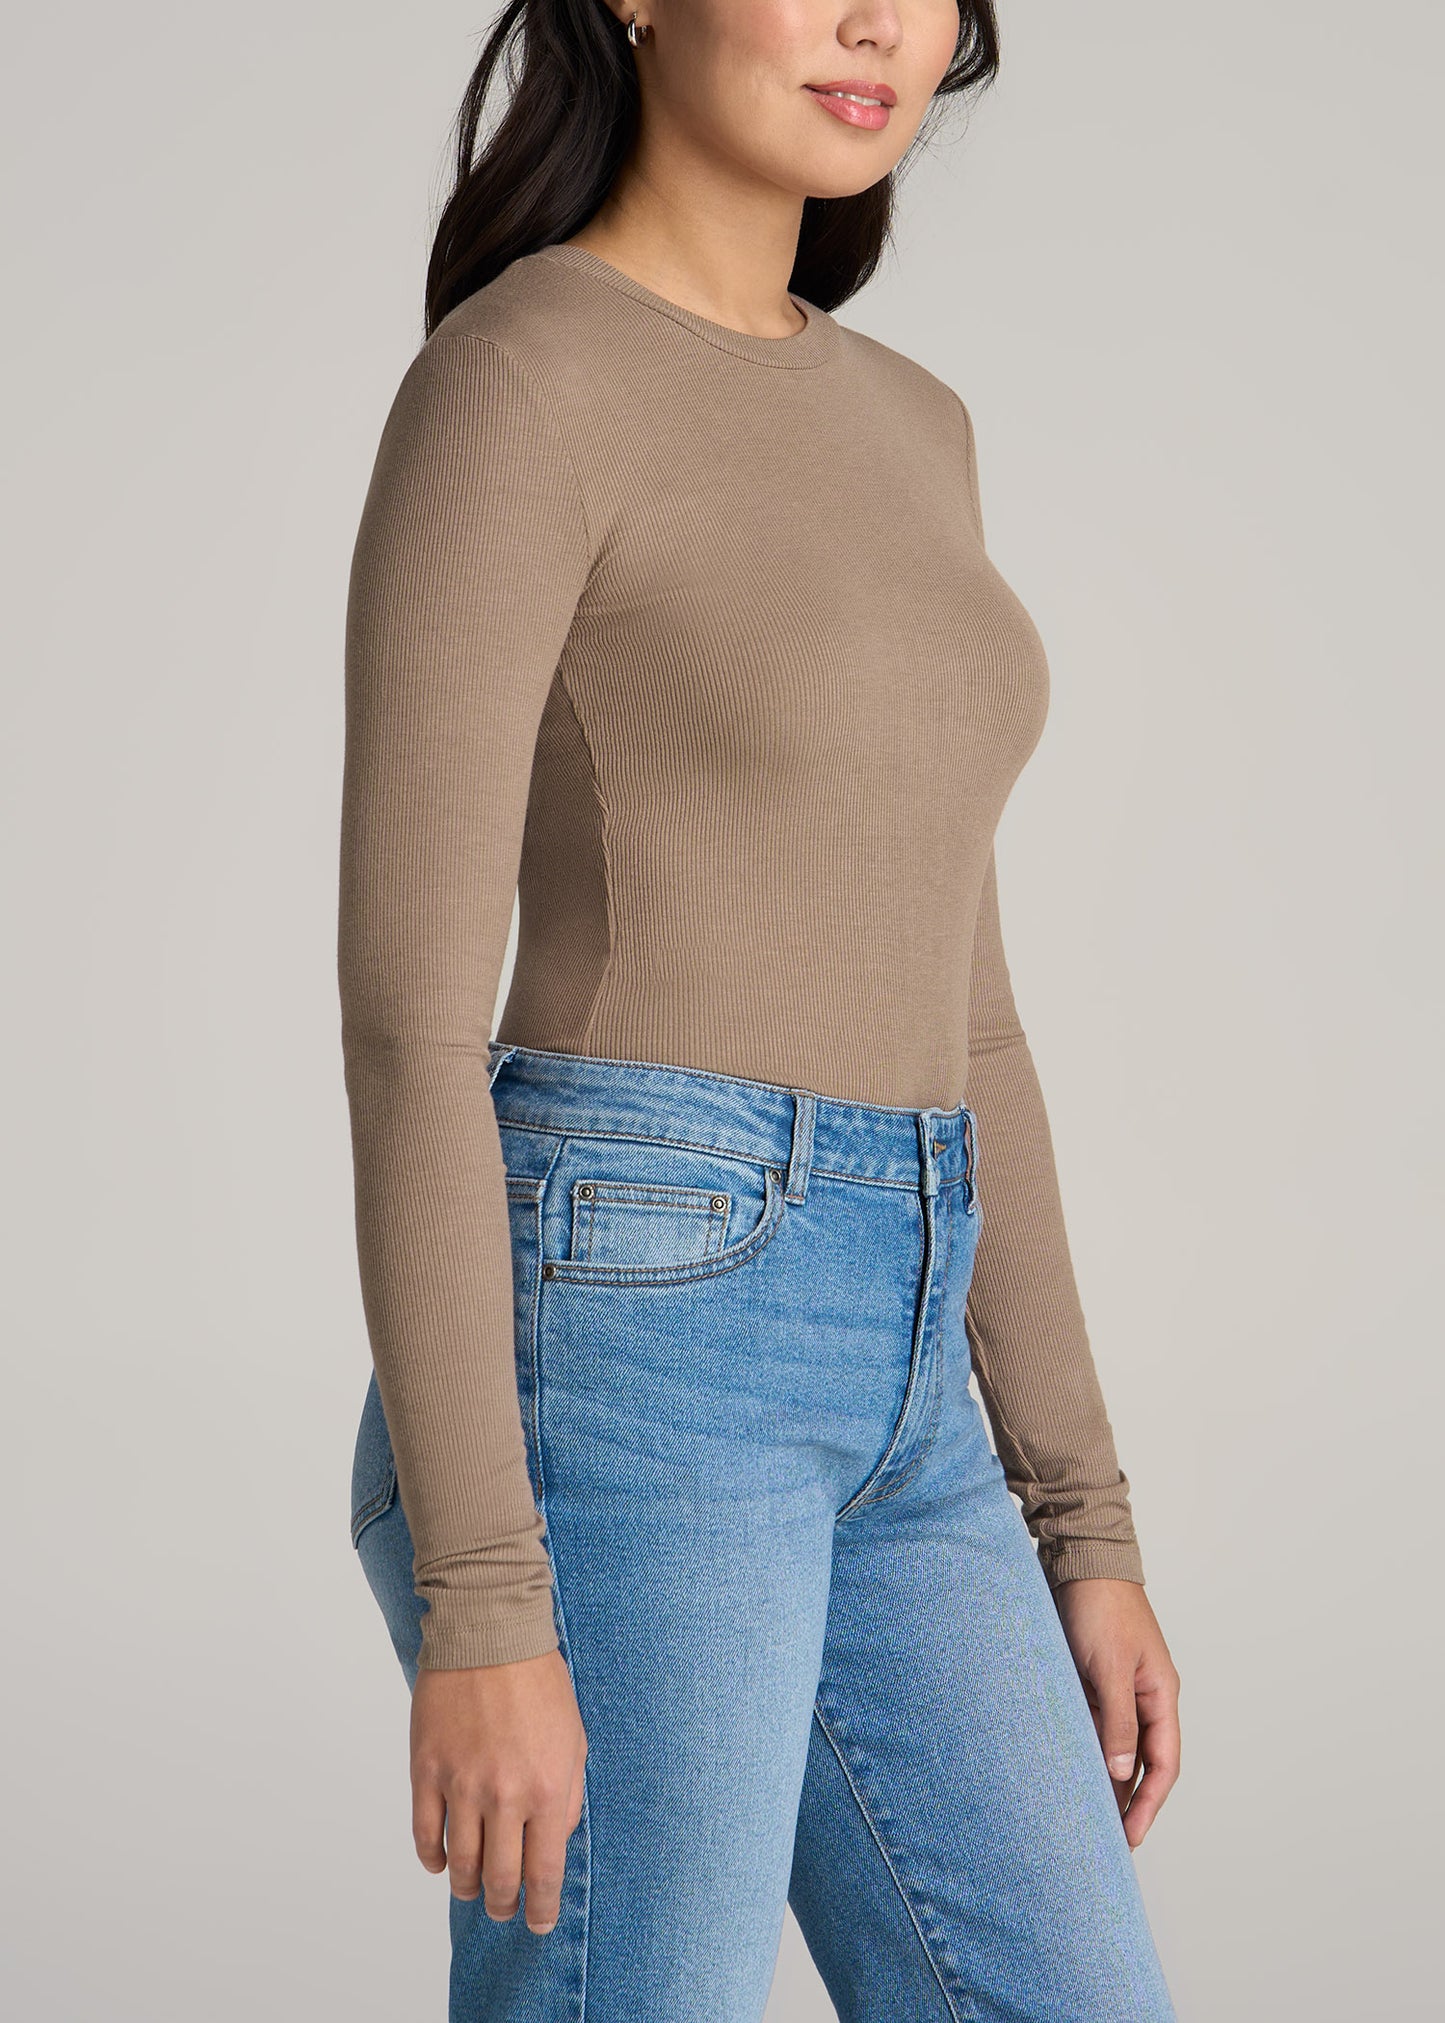 FITTED Ribbed Long Sleeve Tee in Latte - Tall Women's Shirts